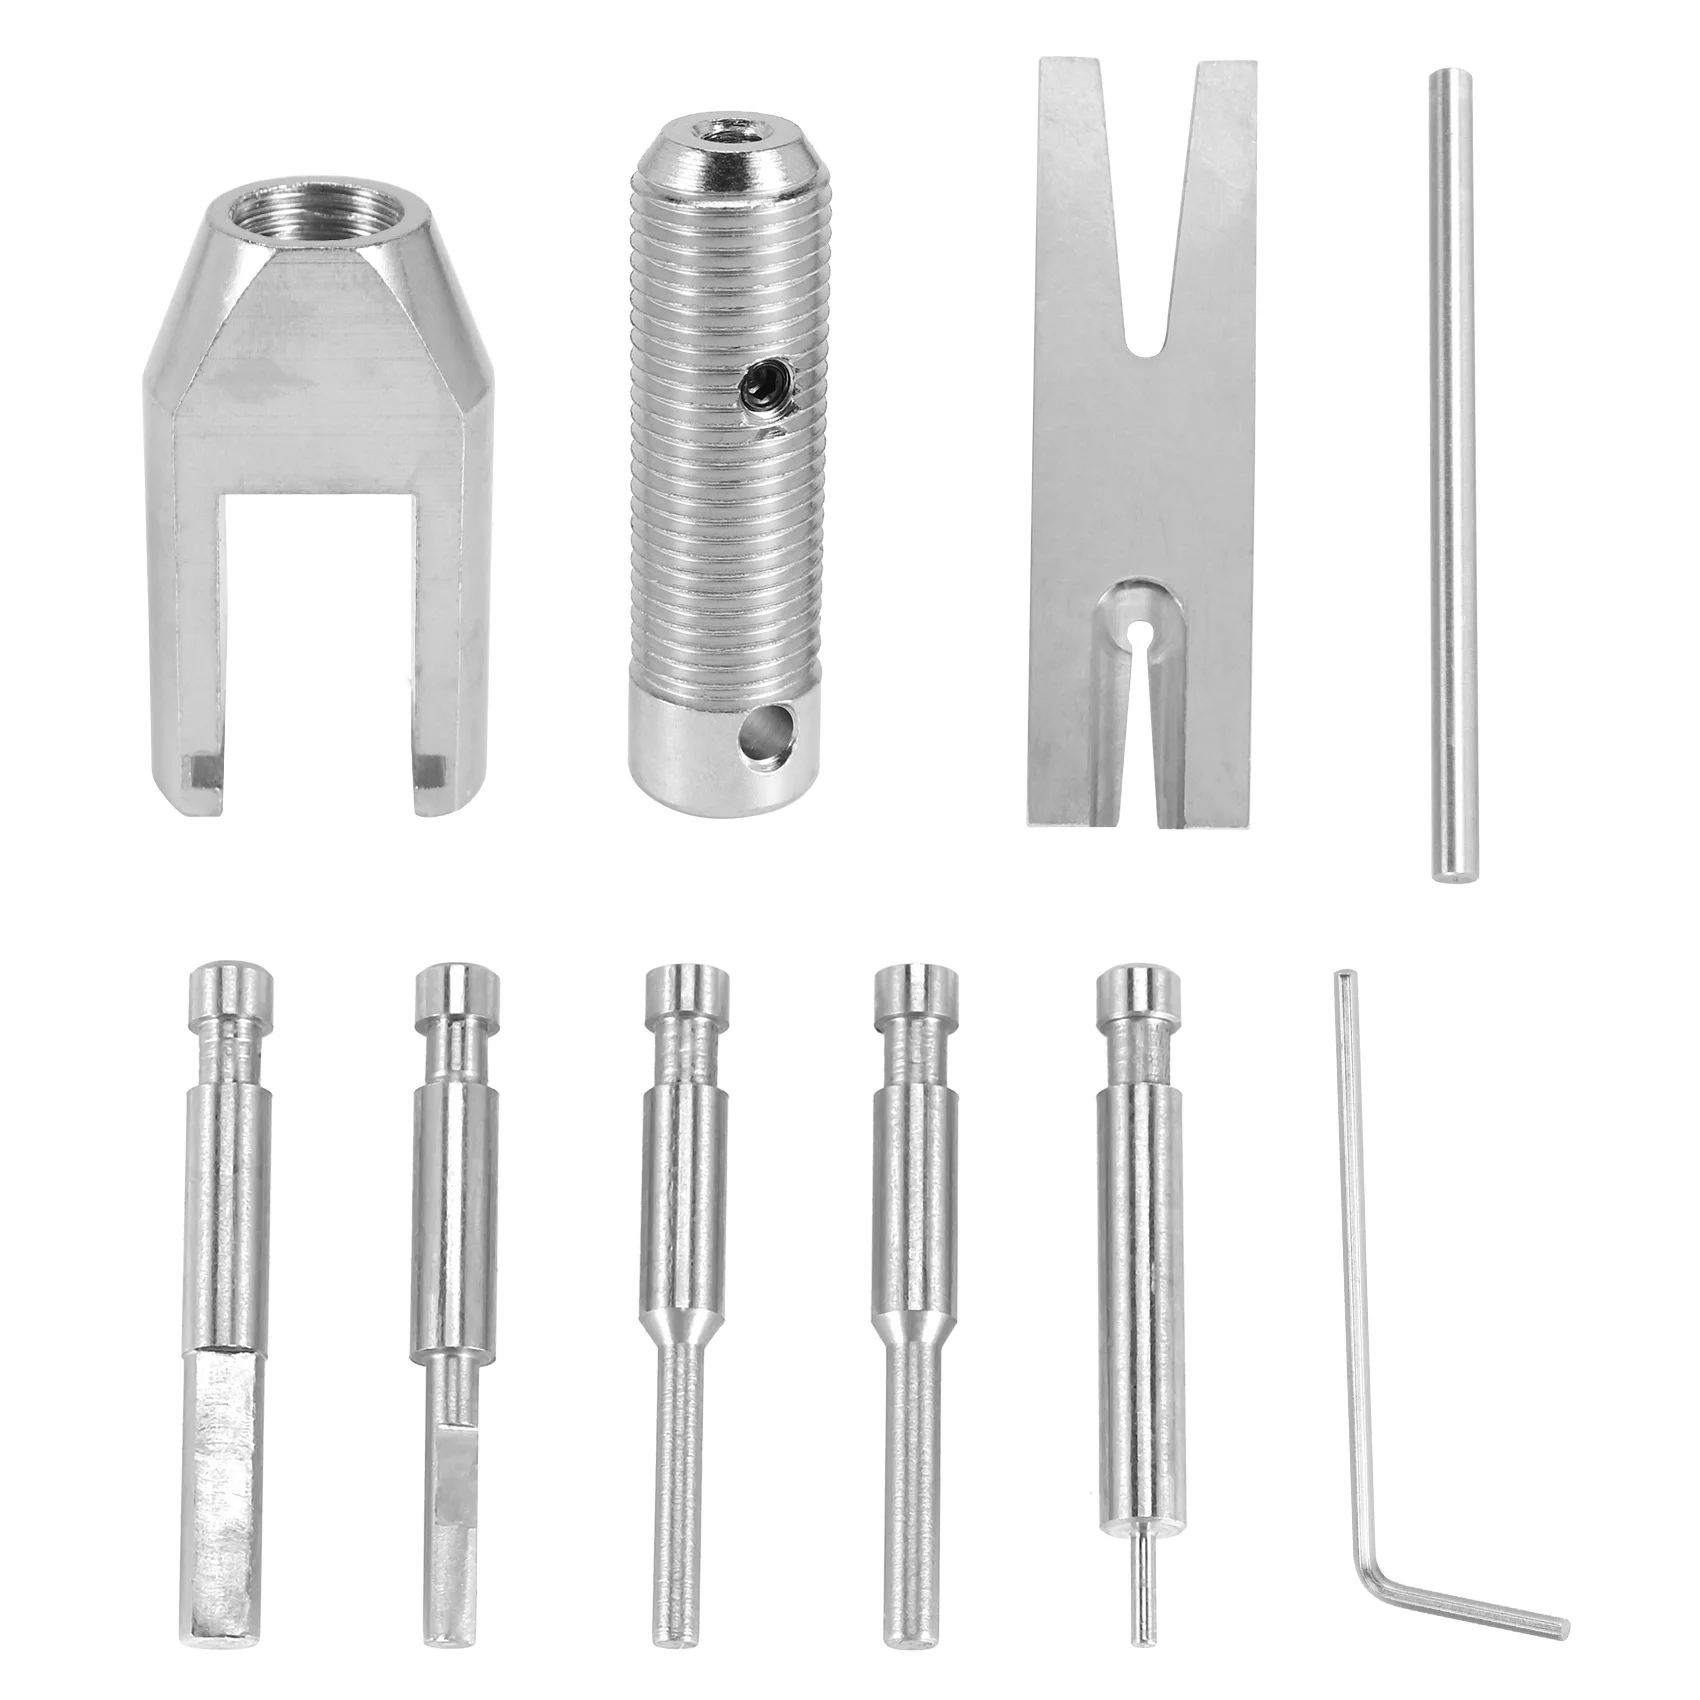 

Motor Pinion Gear Puller Remover Tools Set For Rc Helicopter Motor Pinion Parts - Aluminium Alloy